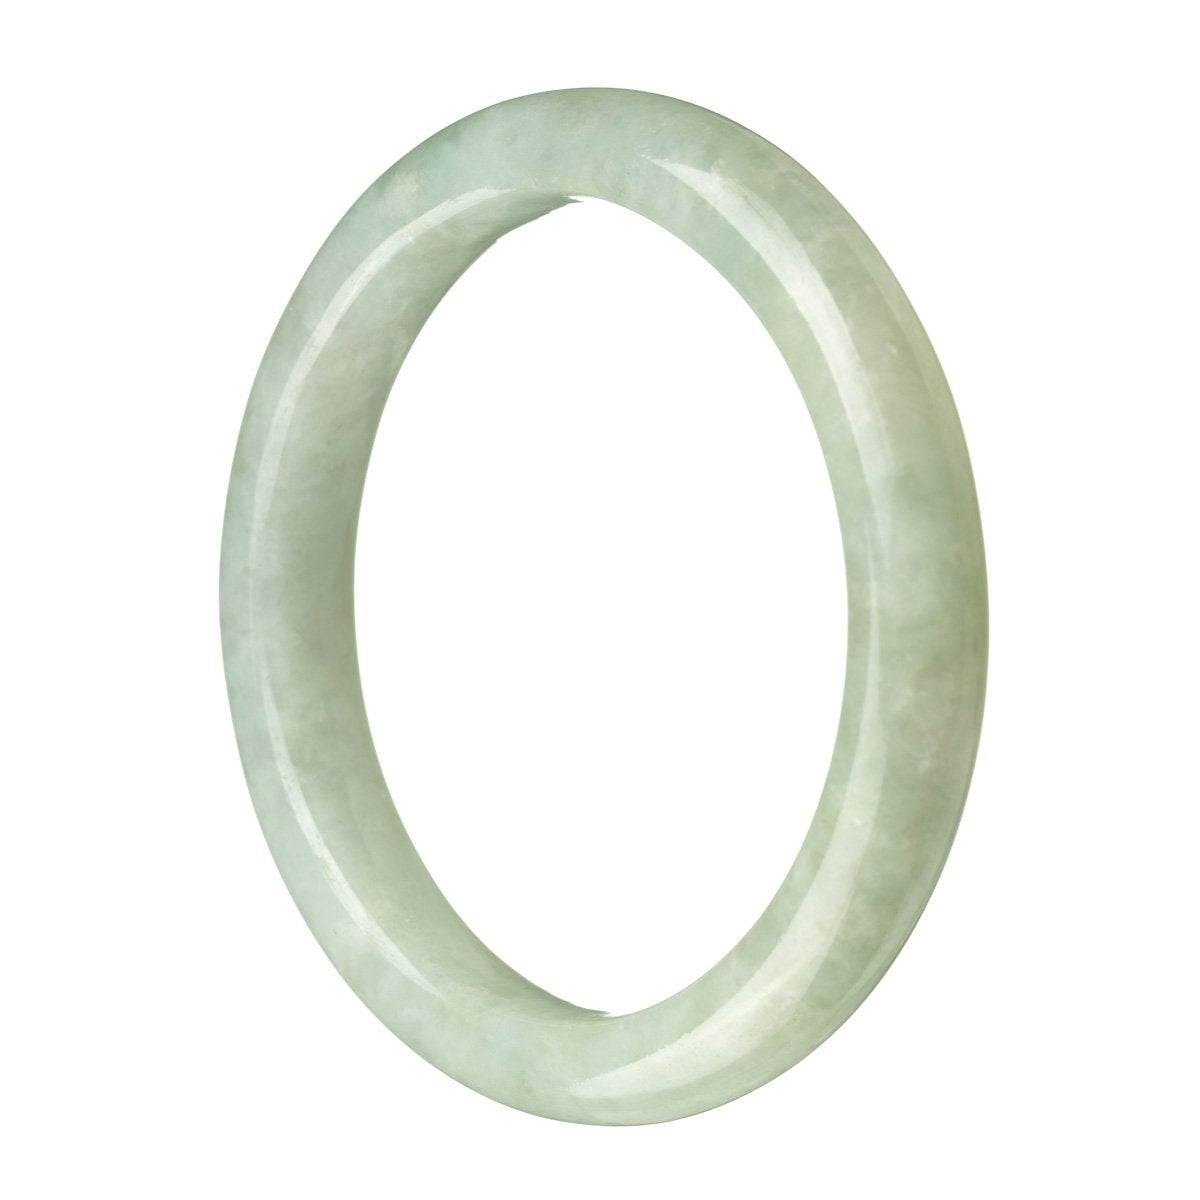 A light green traditional jade bangle bracelet, made from genuine Grade A jade. The bracelet is semi-round in shape and measures 63mm in diameter. Sold by MAYS GEMS.